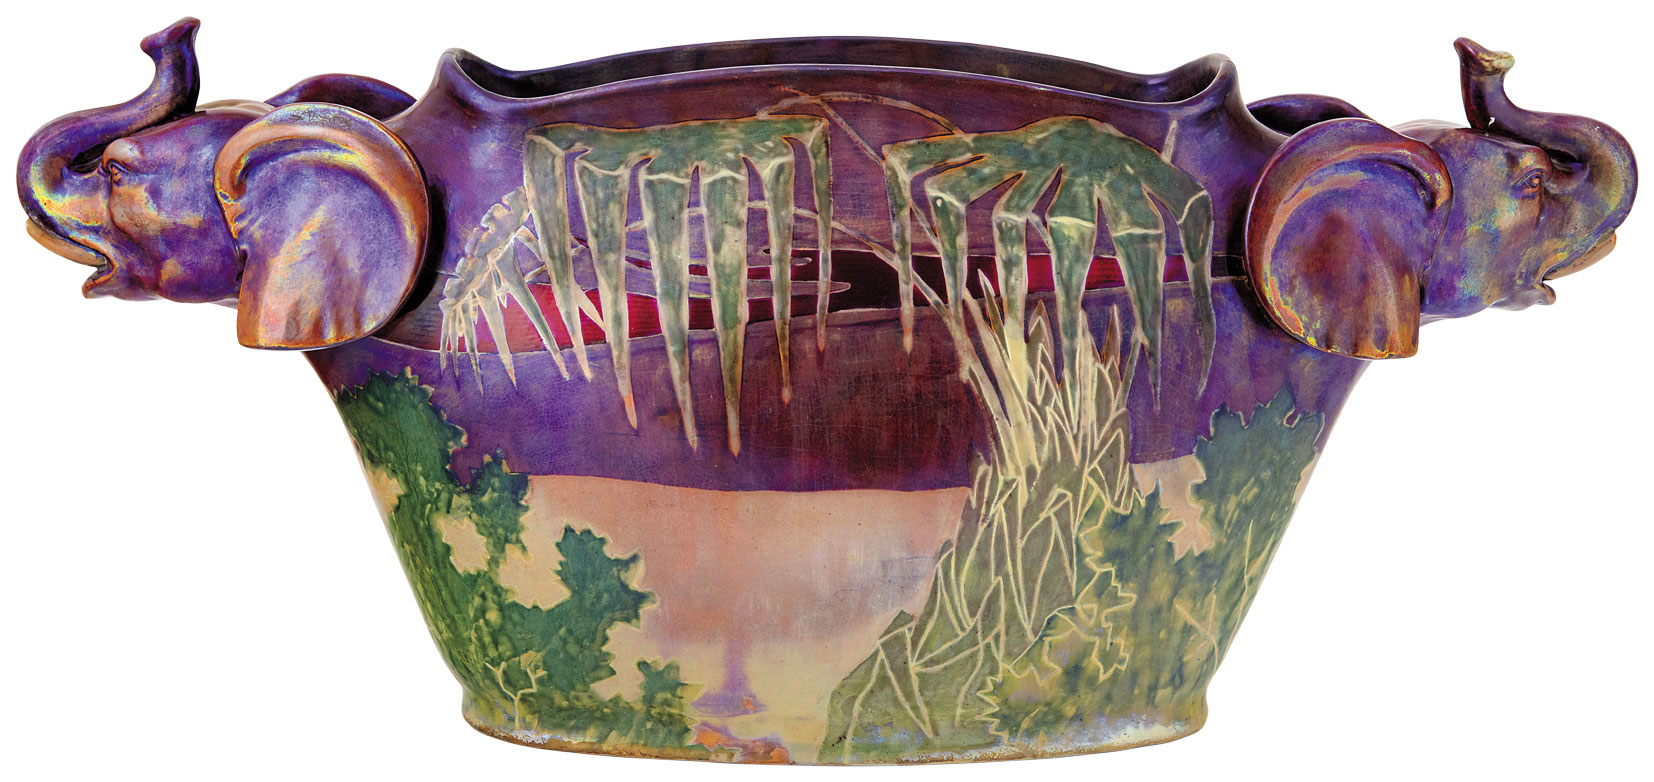 Zsolnay Flowerpot with Decoration depicting Elephant Heads and Tropical Landscape, around 1910, PLAN BY: KAPÁS NAGY MIHÁLY, 1908